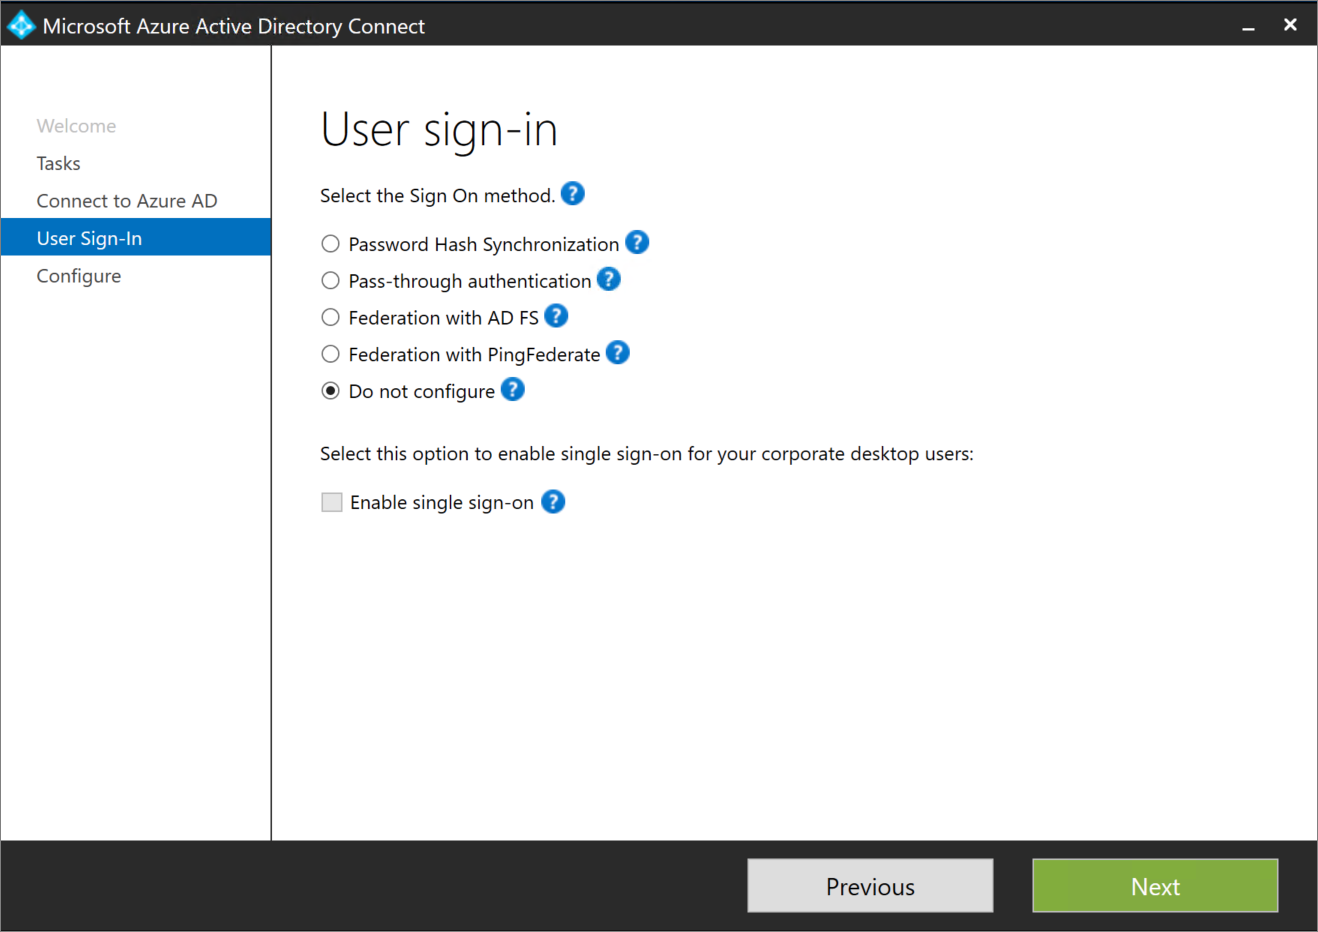  See Do not Configure option on the user sign-in page